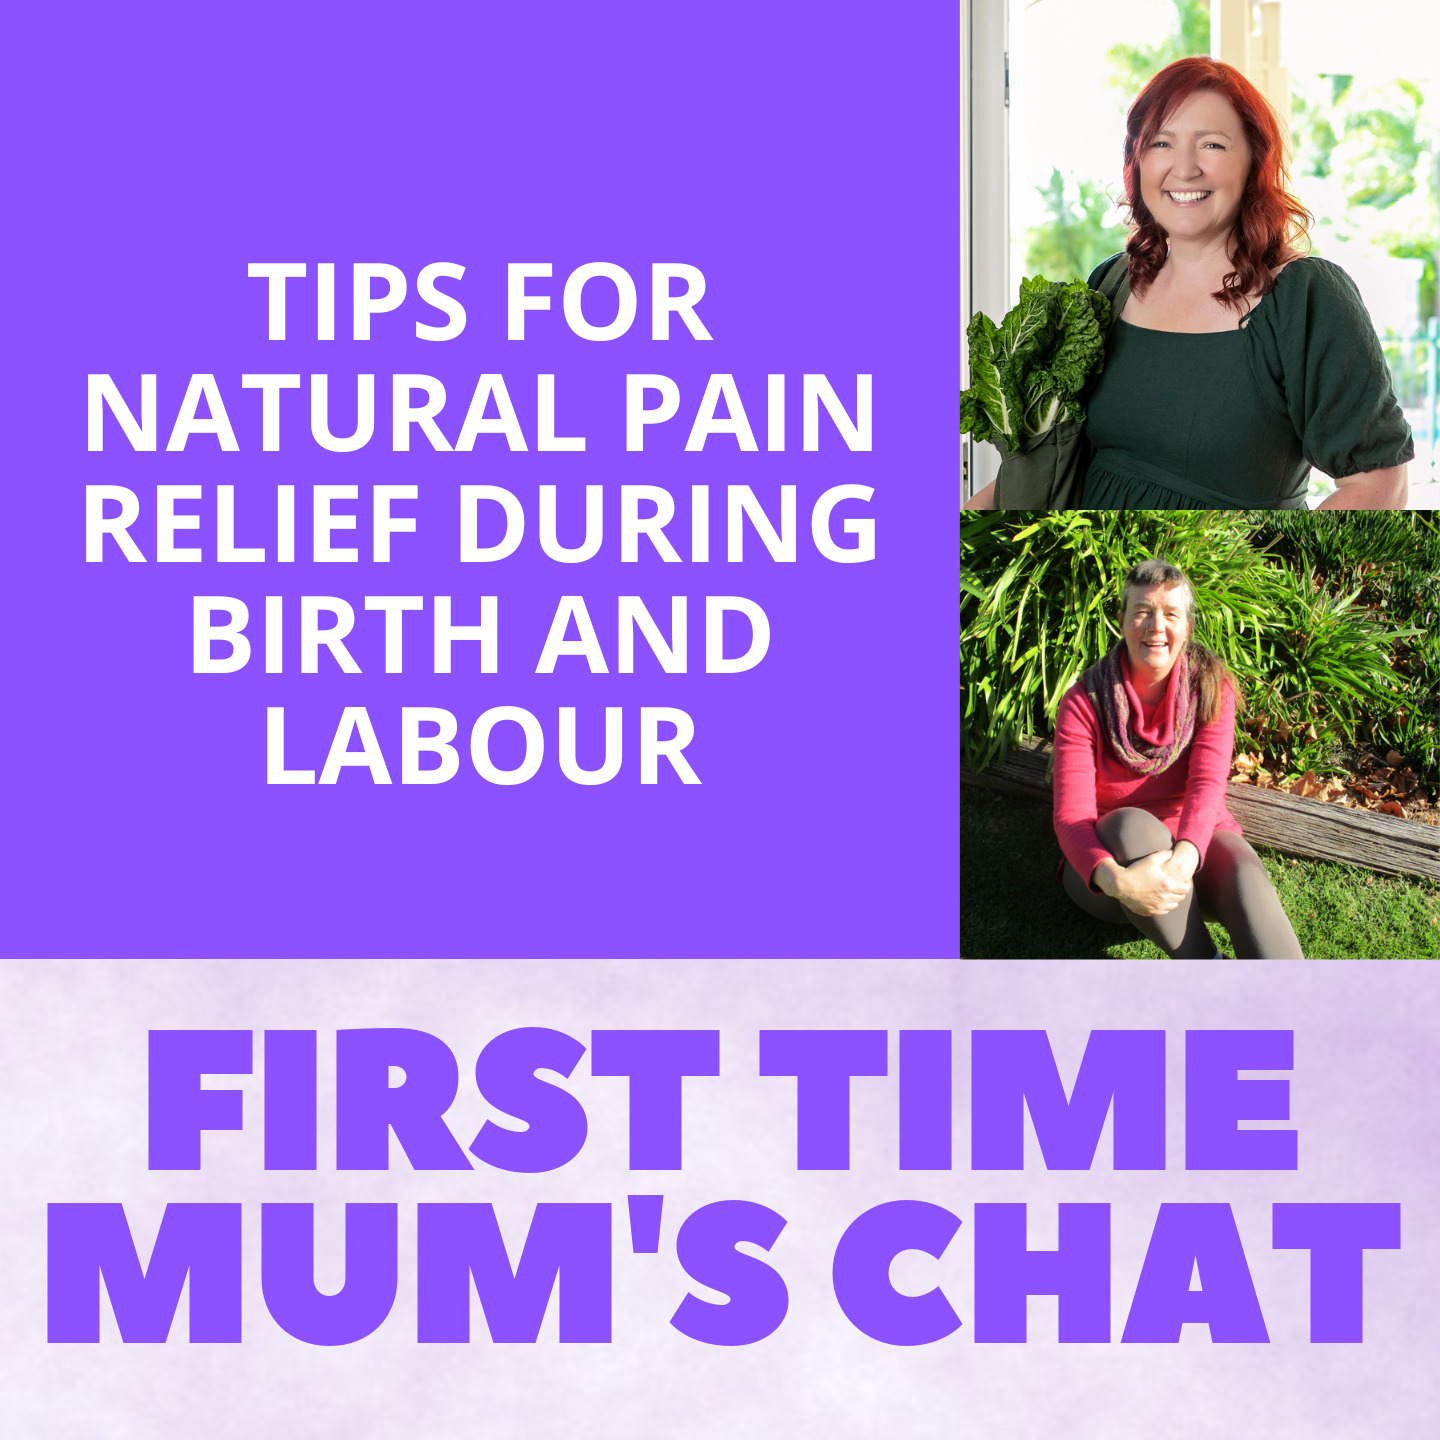 Tips For Natural Pain Relief During Birth and Labour